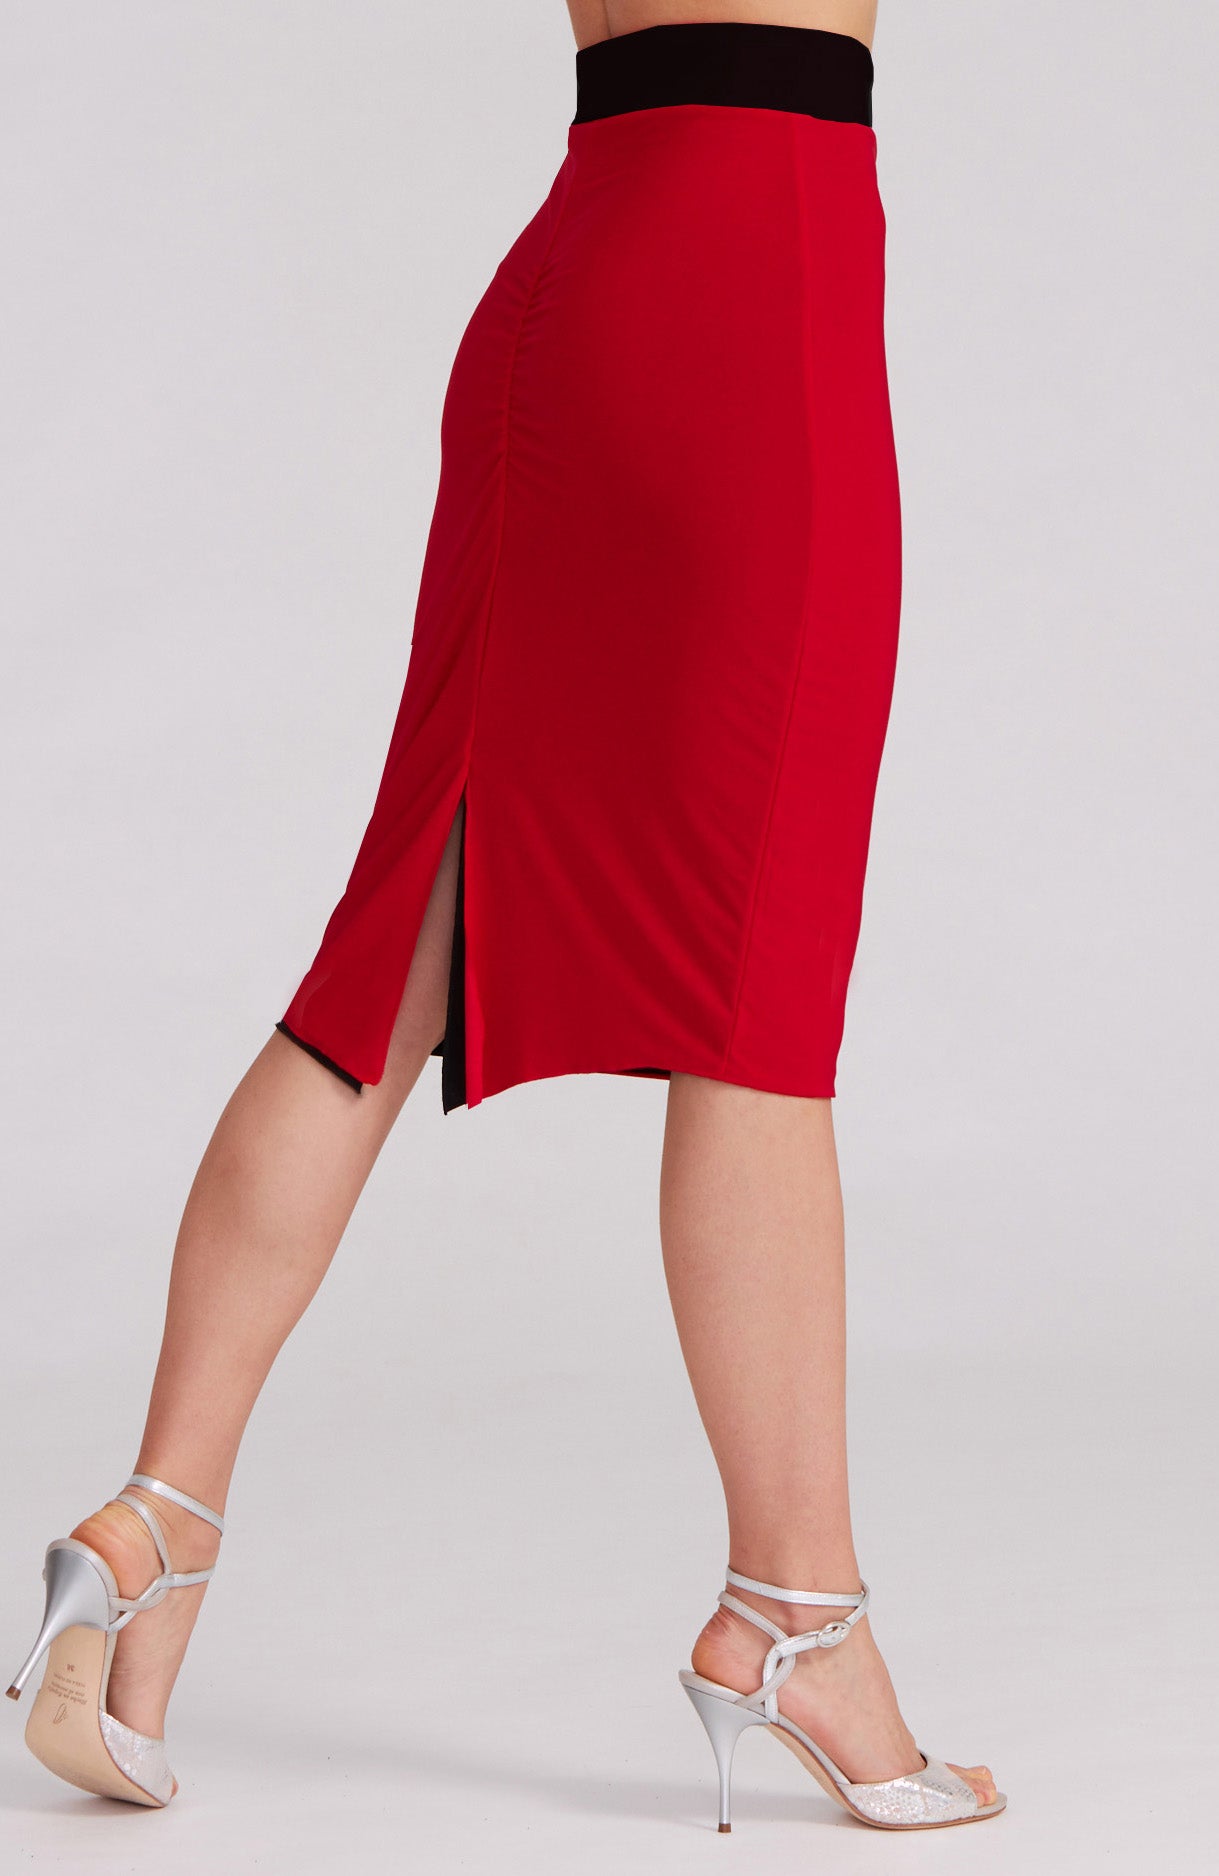 tango skirt in red and black